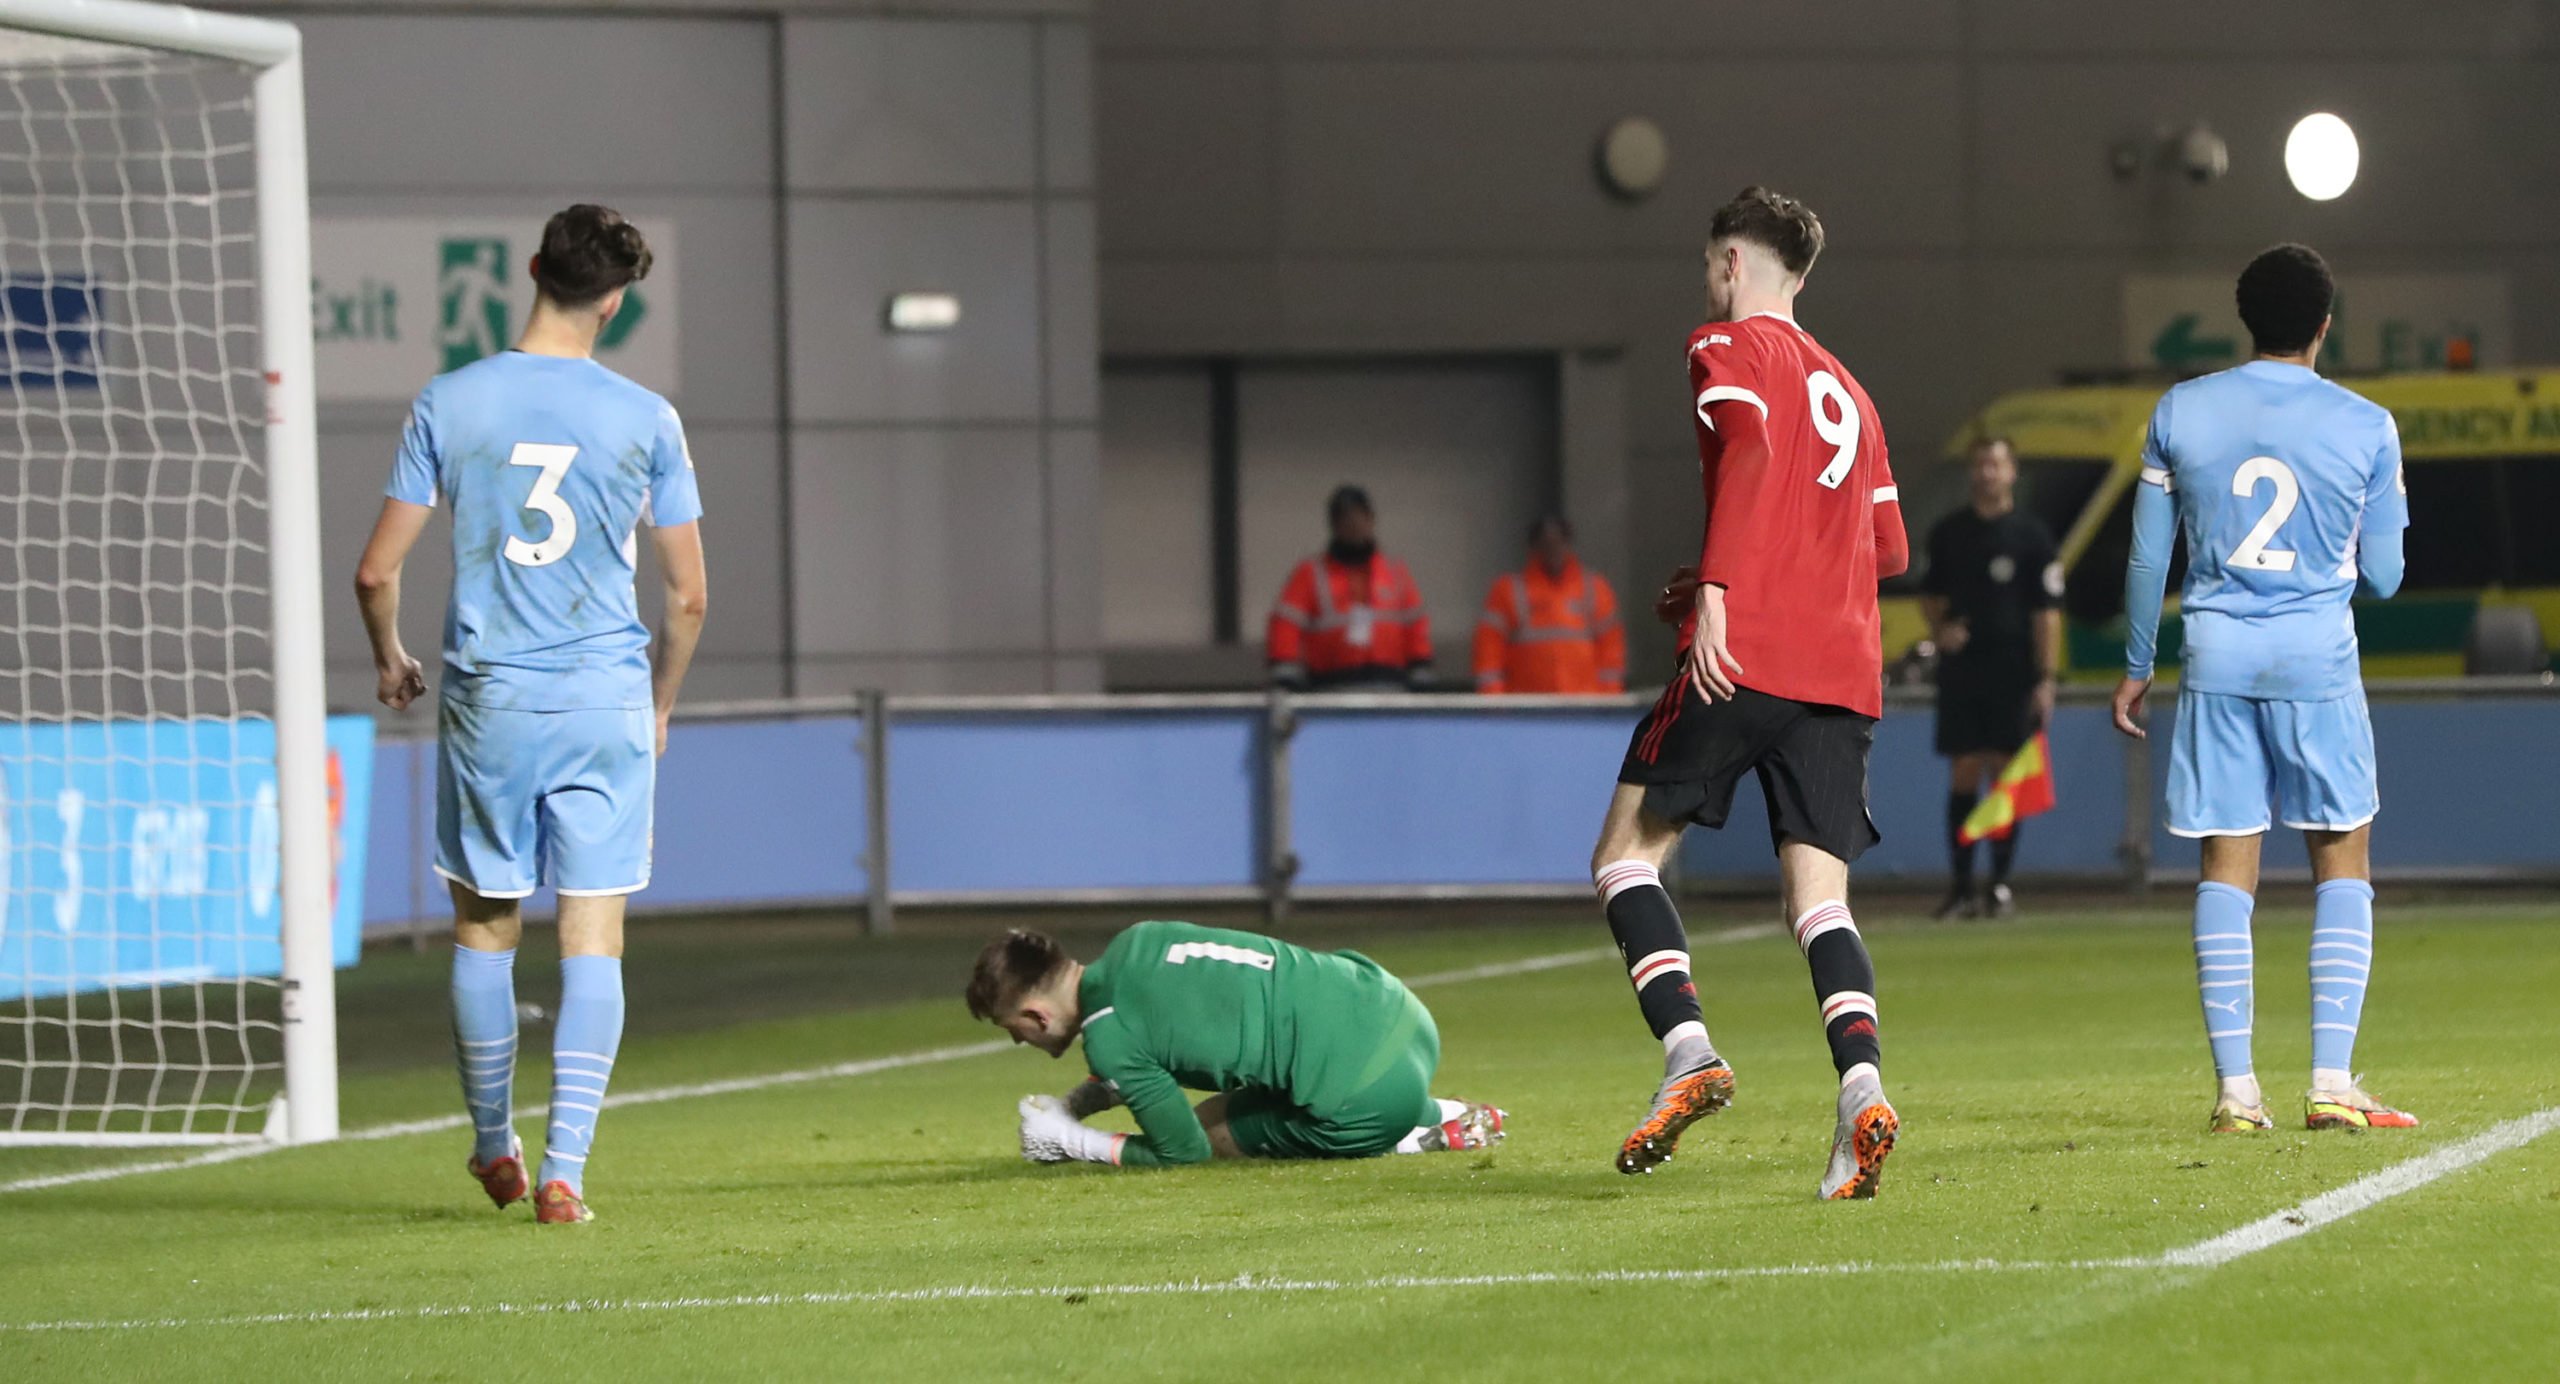 Three takeaways from Manchester United's under-23 defeat to City